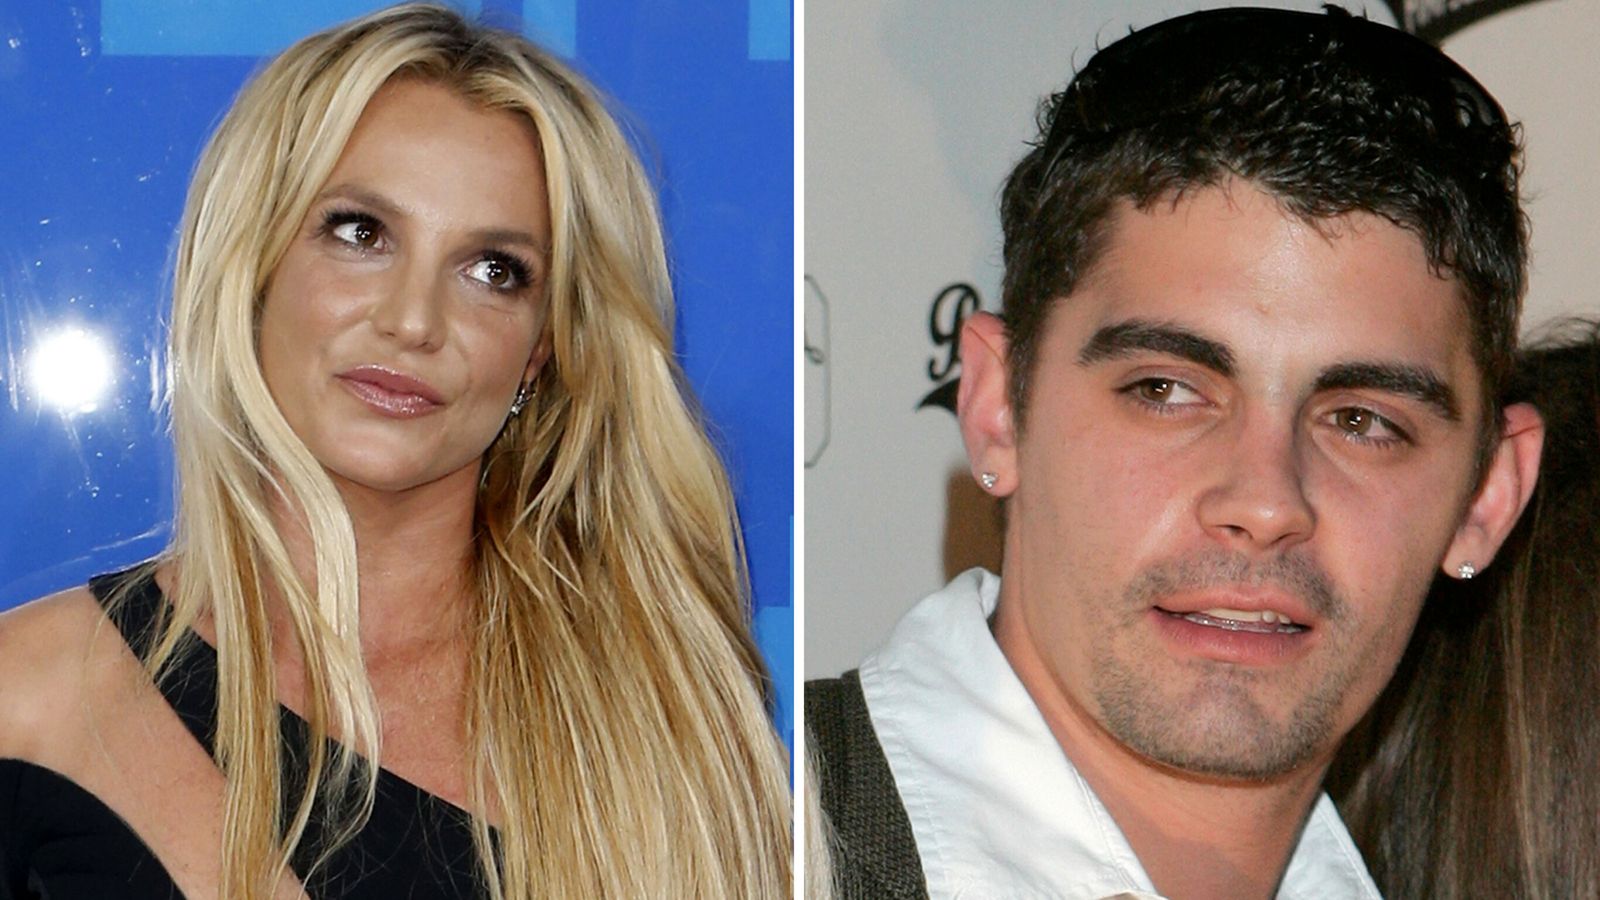 Britney Spears' ex-husband Jason Alexander charged after trying to 'crash' singer's wedding to Sam Asghari